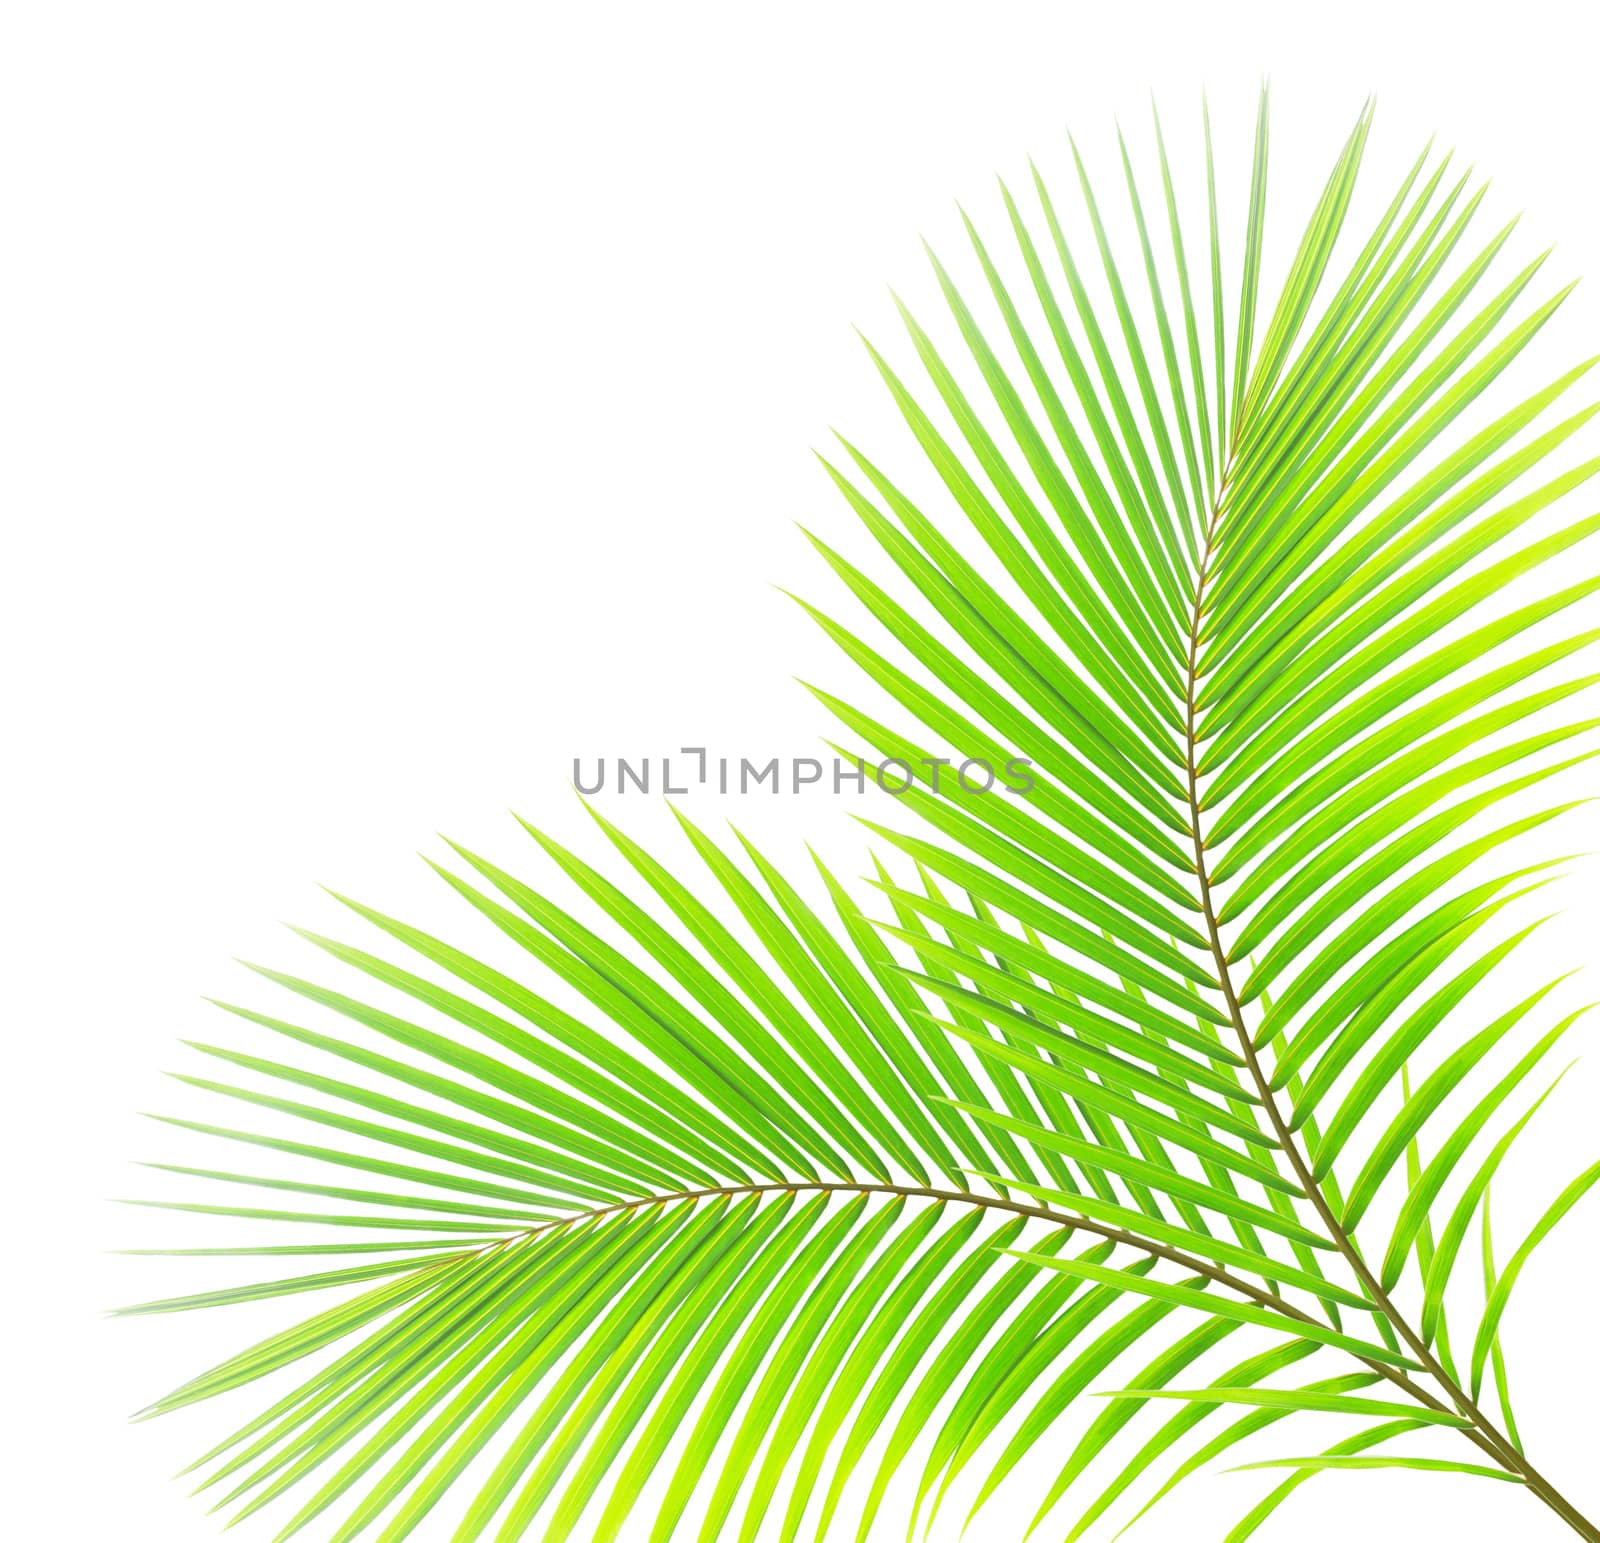 Green palm leaf isolated on white background